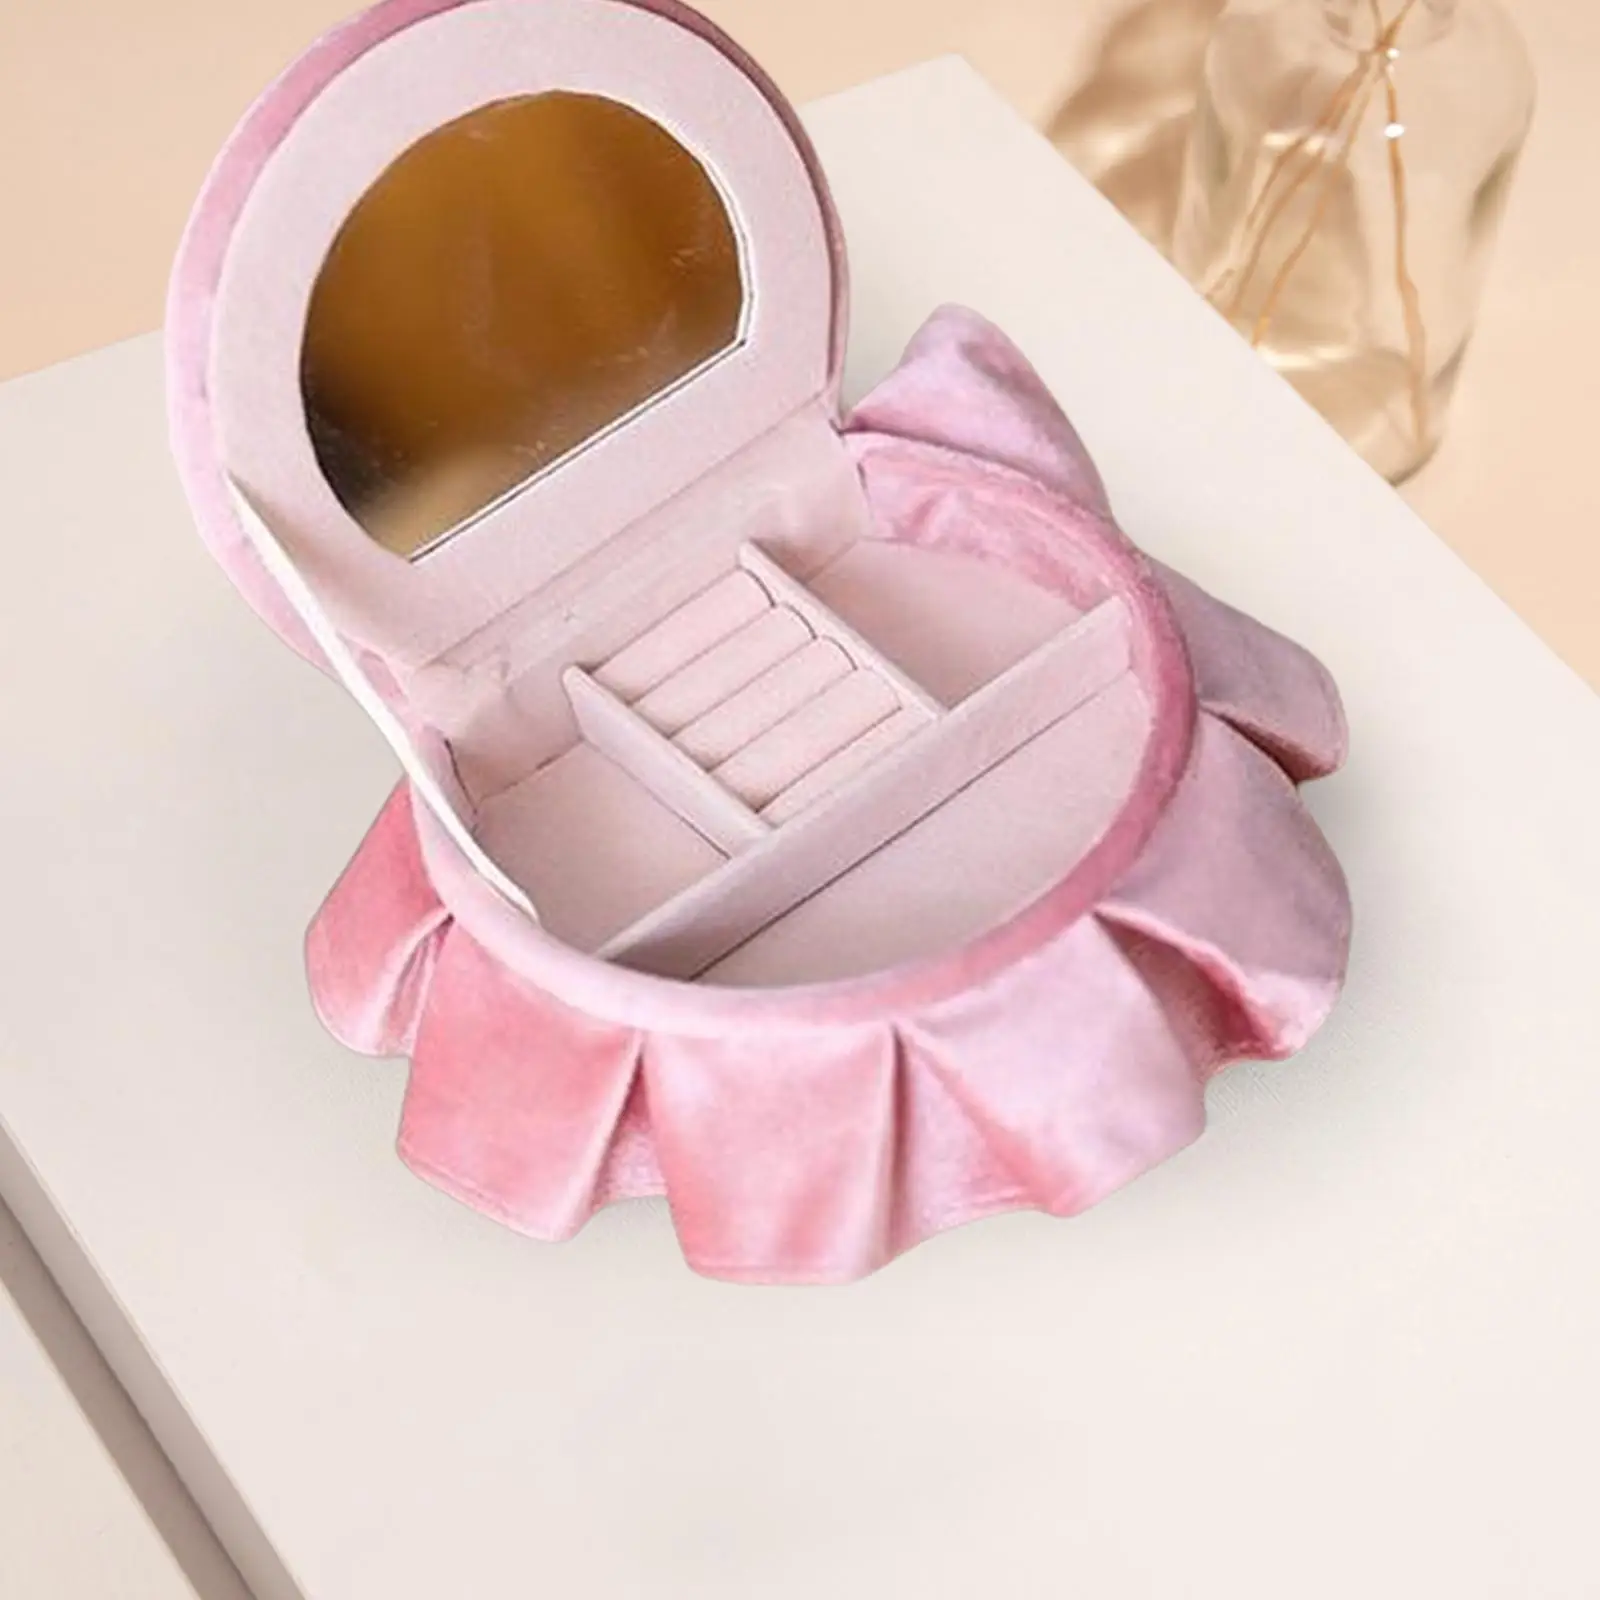 Jewelry Storage Case Dollhouse bed Toy Mini Furniture Dolls Accessories Jewelry Box Doll Bed for Dollhouse Bedroom Decor